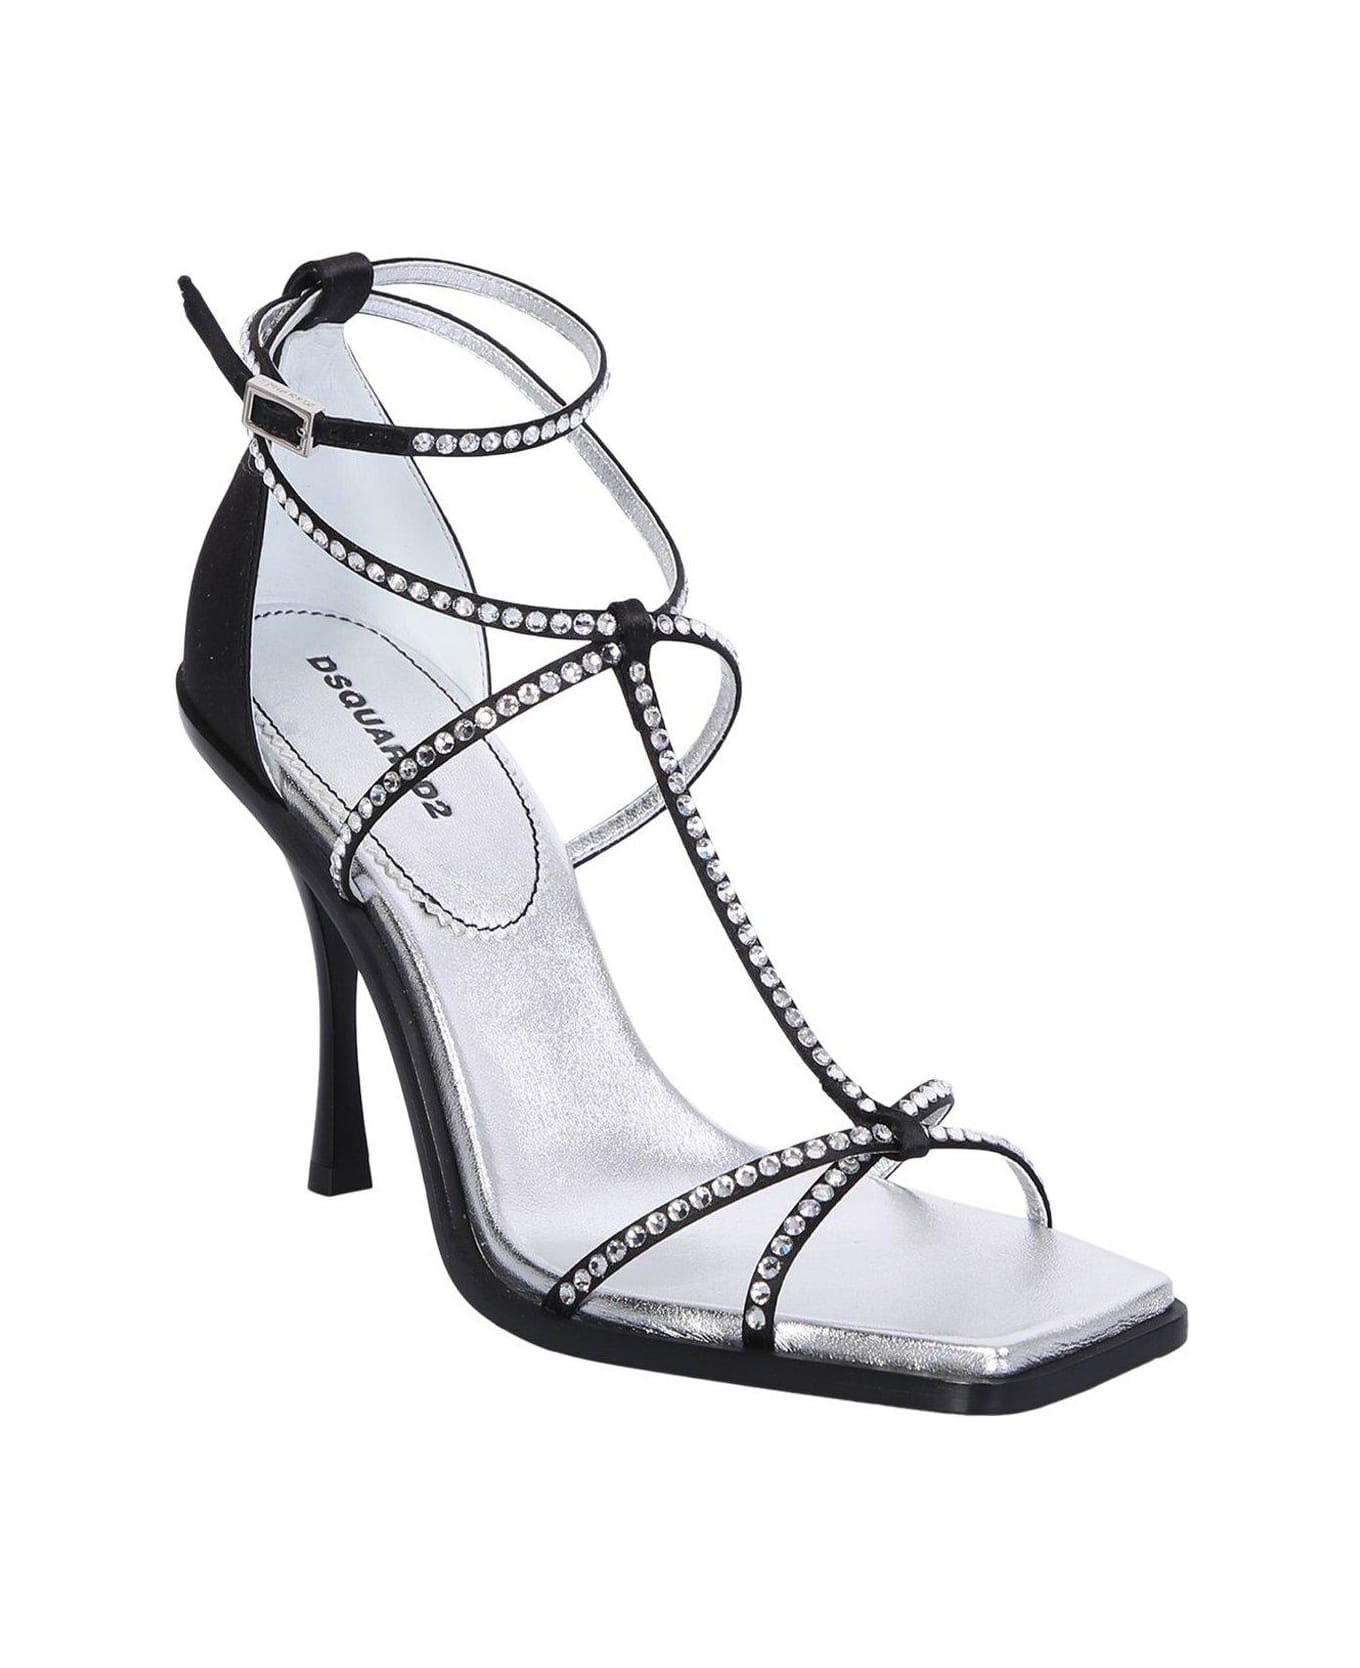 Dsquared2 Holiday Party Ankle Strap Sandals - Black